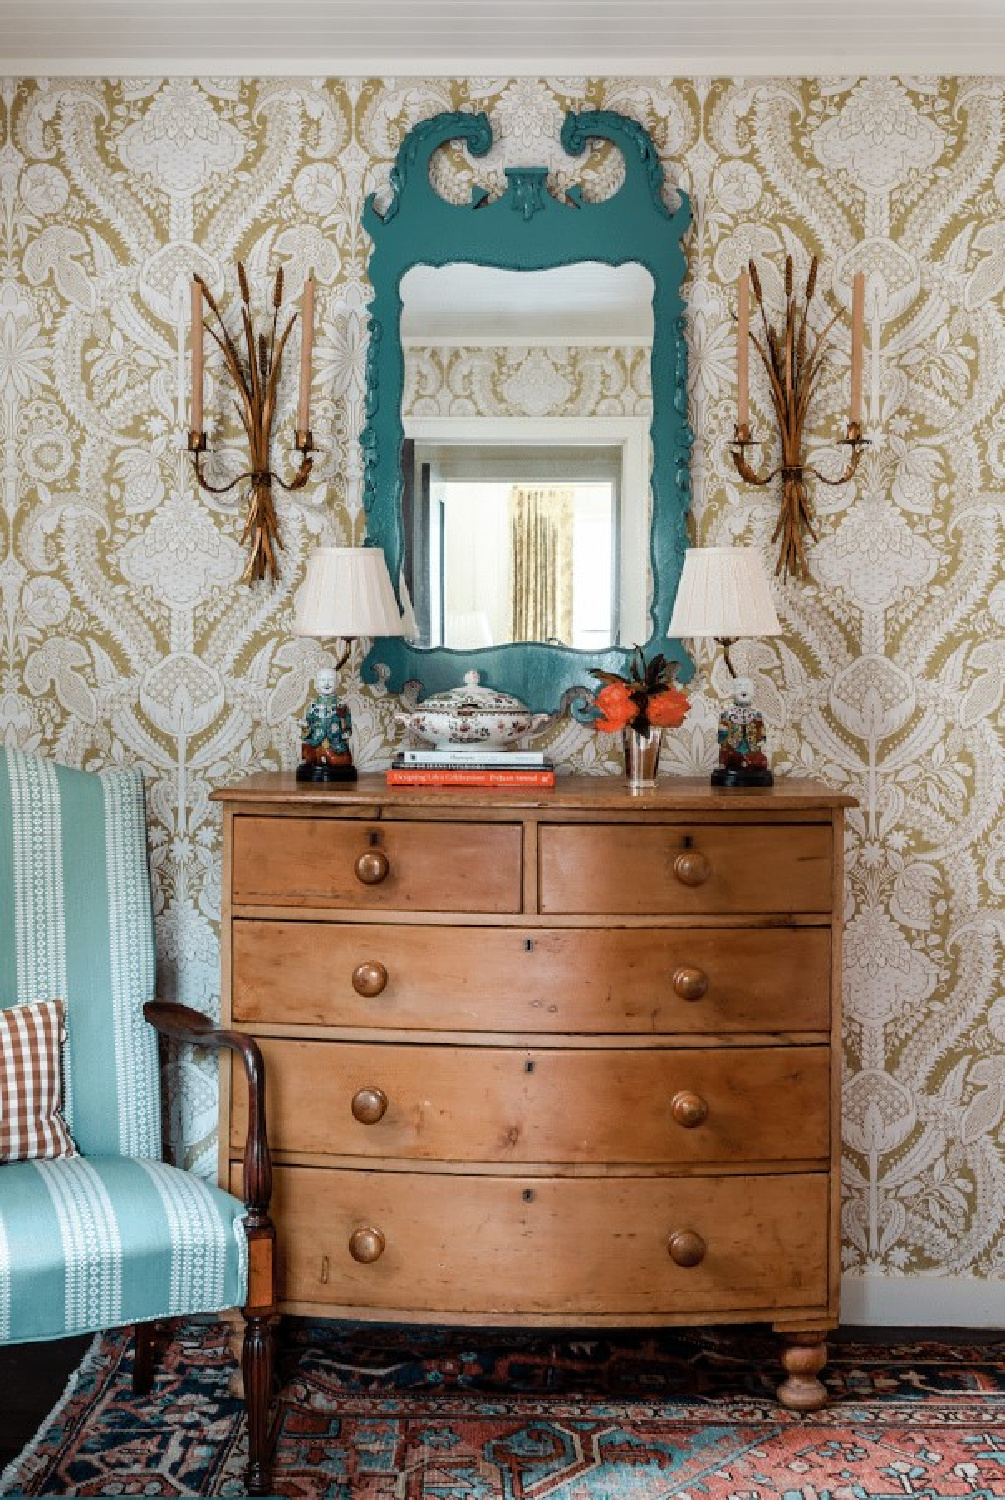 Beautiful Southern cottage decorated by James Farmer with pine dresser and turquoise accents with a fanciful wallpaper - photo: Jeff Herr. #jamesfarmer #vintagestyle #traditionalhomes